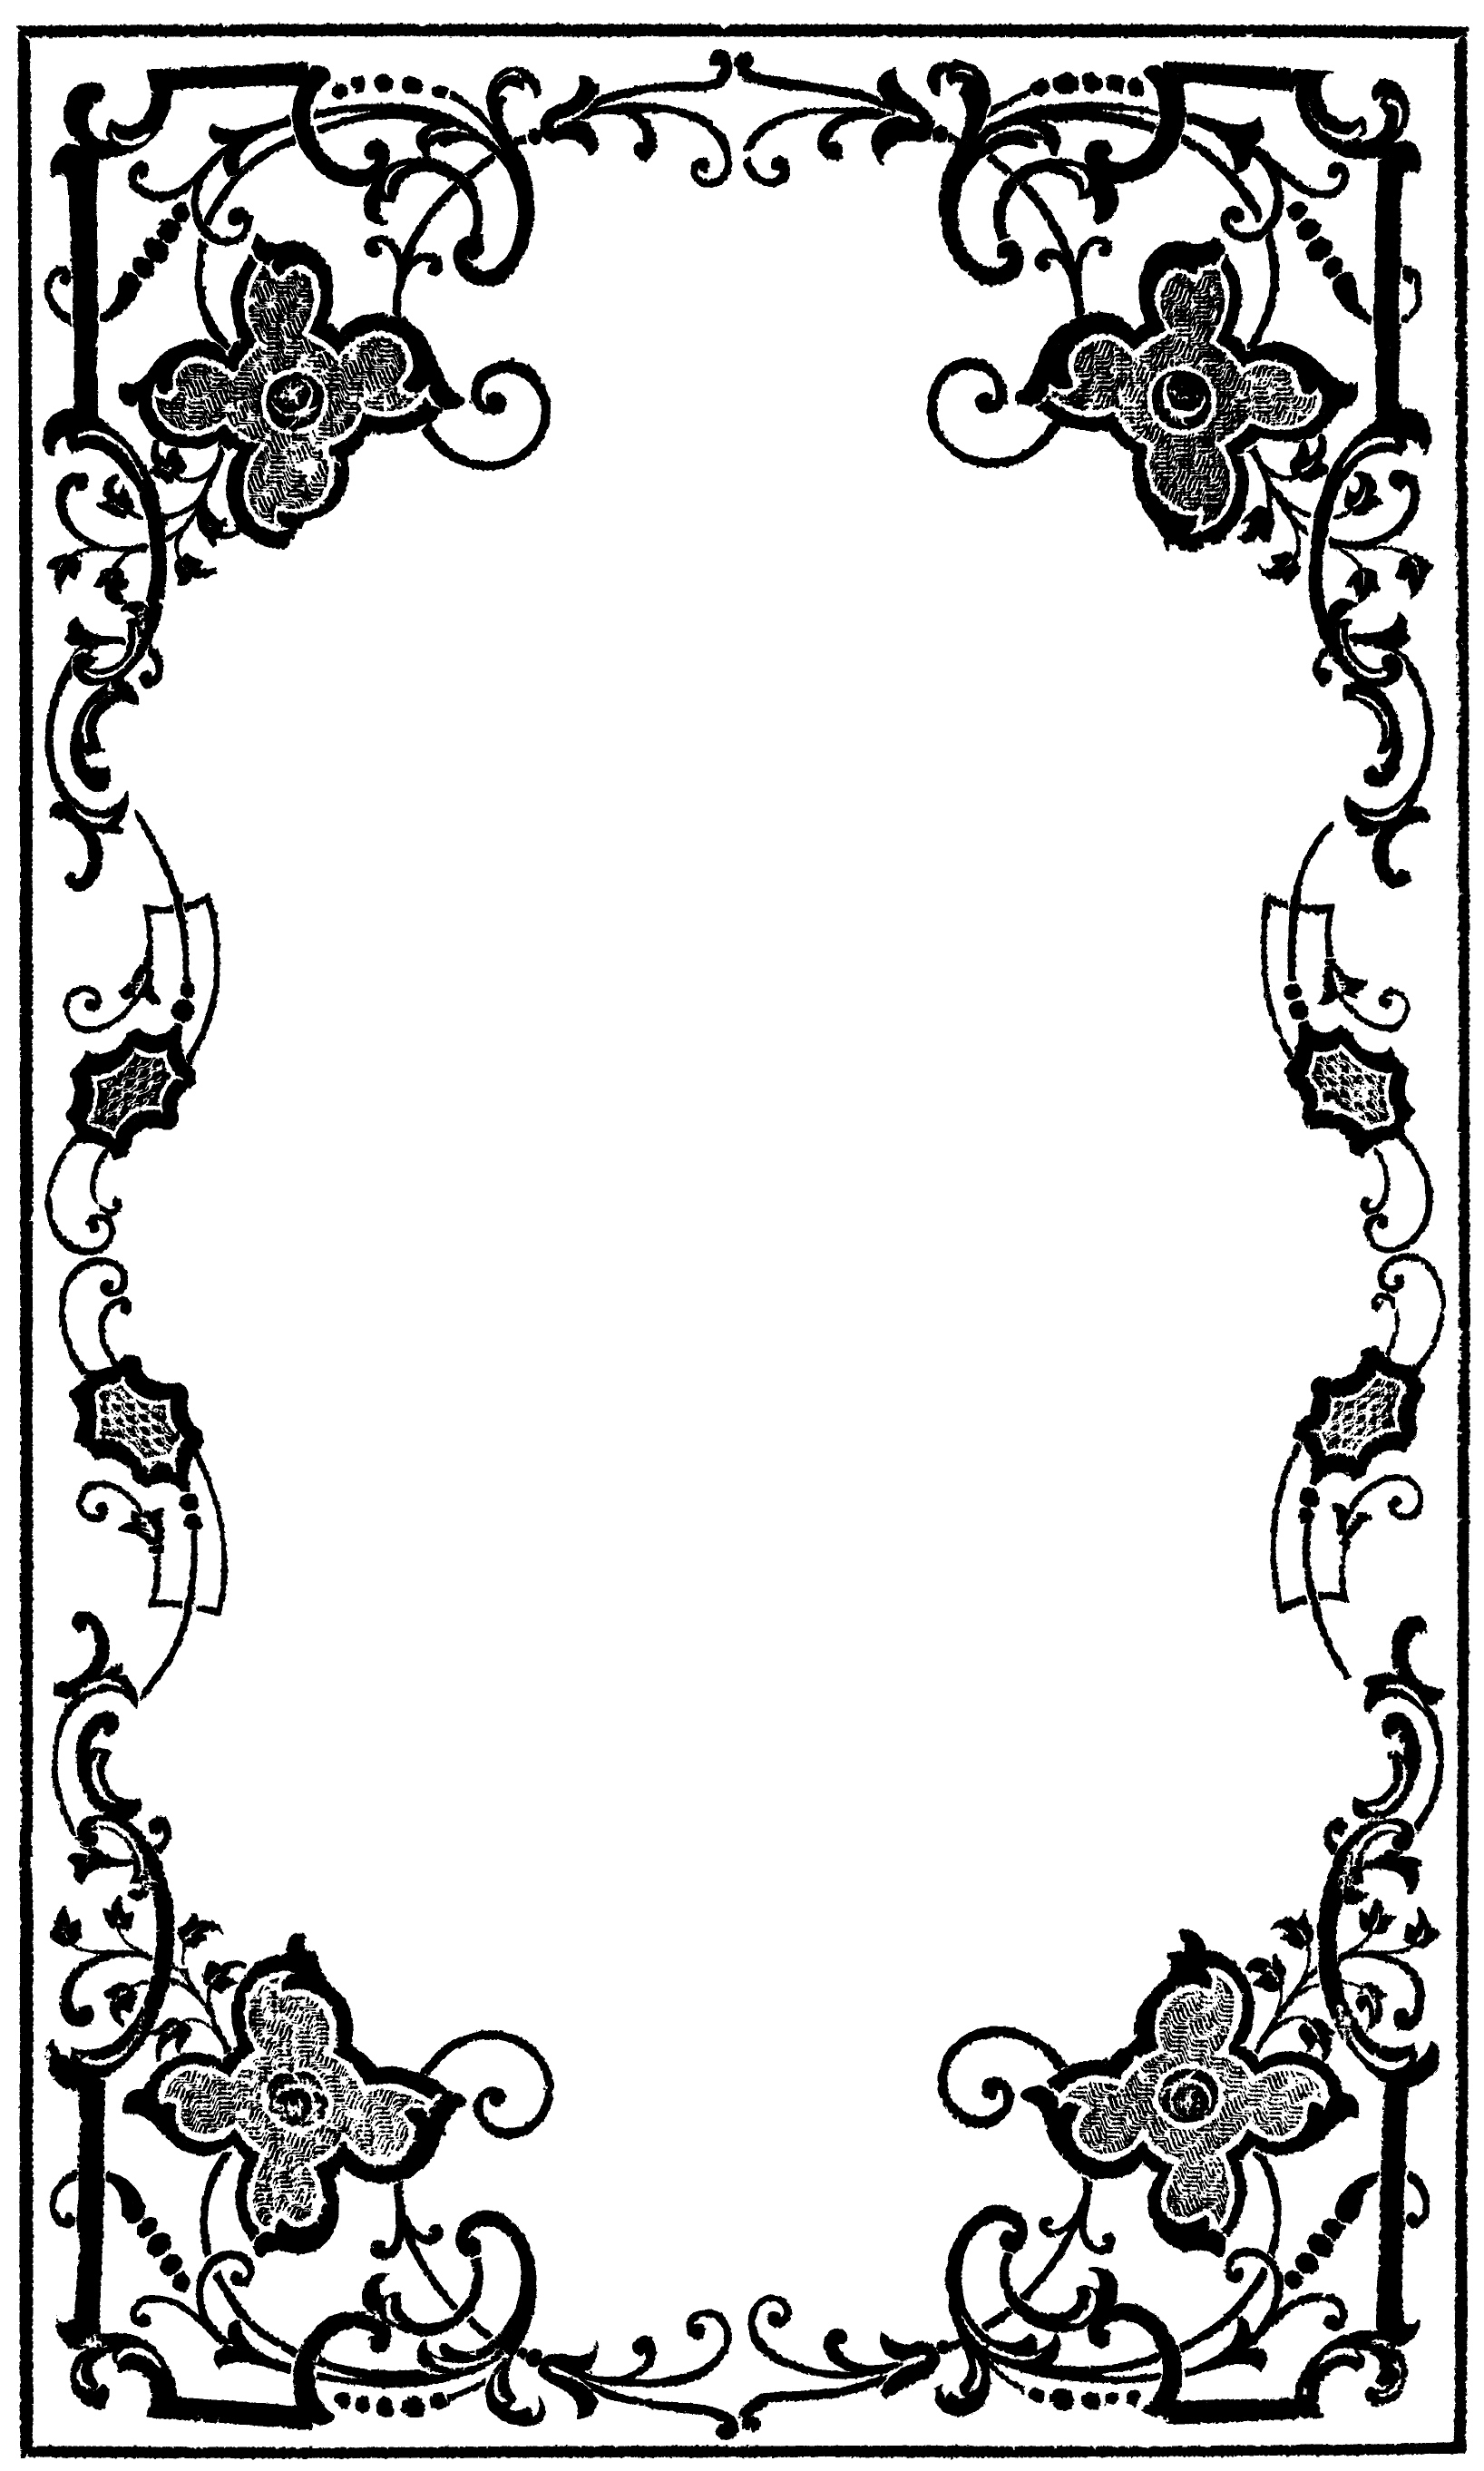 Decorative Page Borders Free - Clipart library